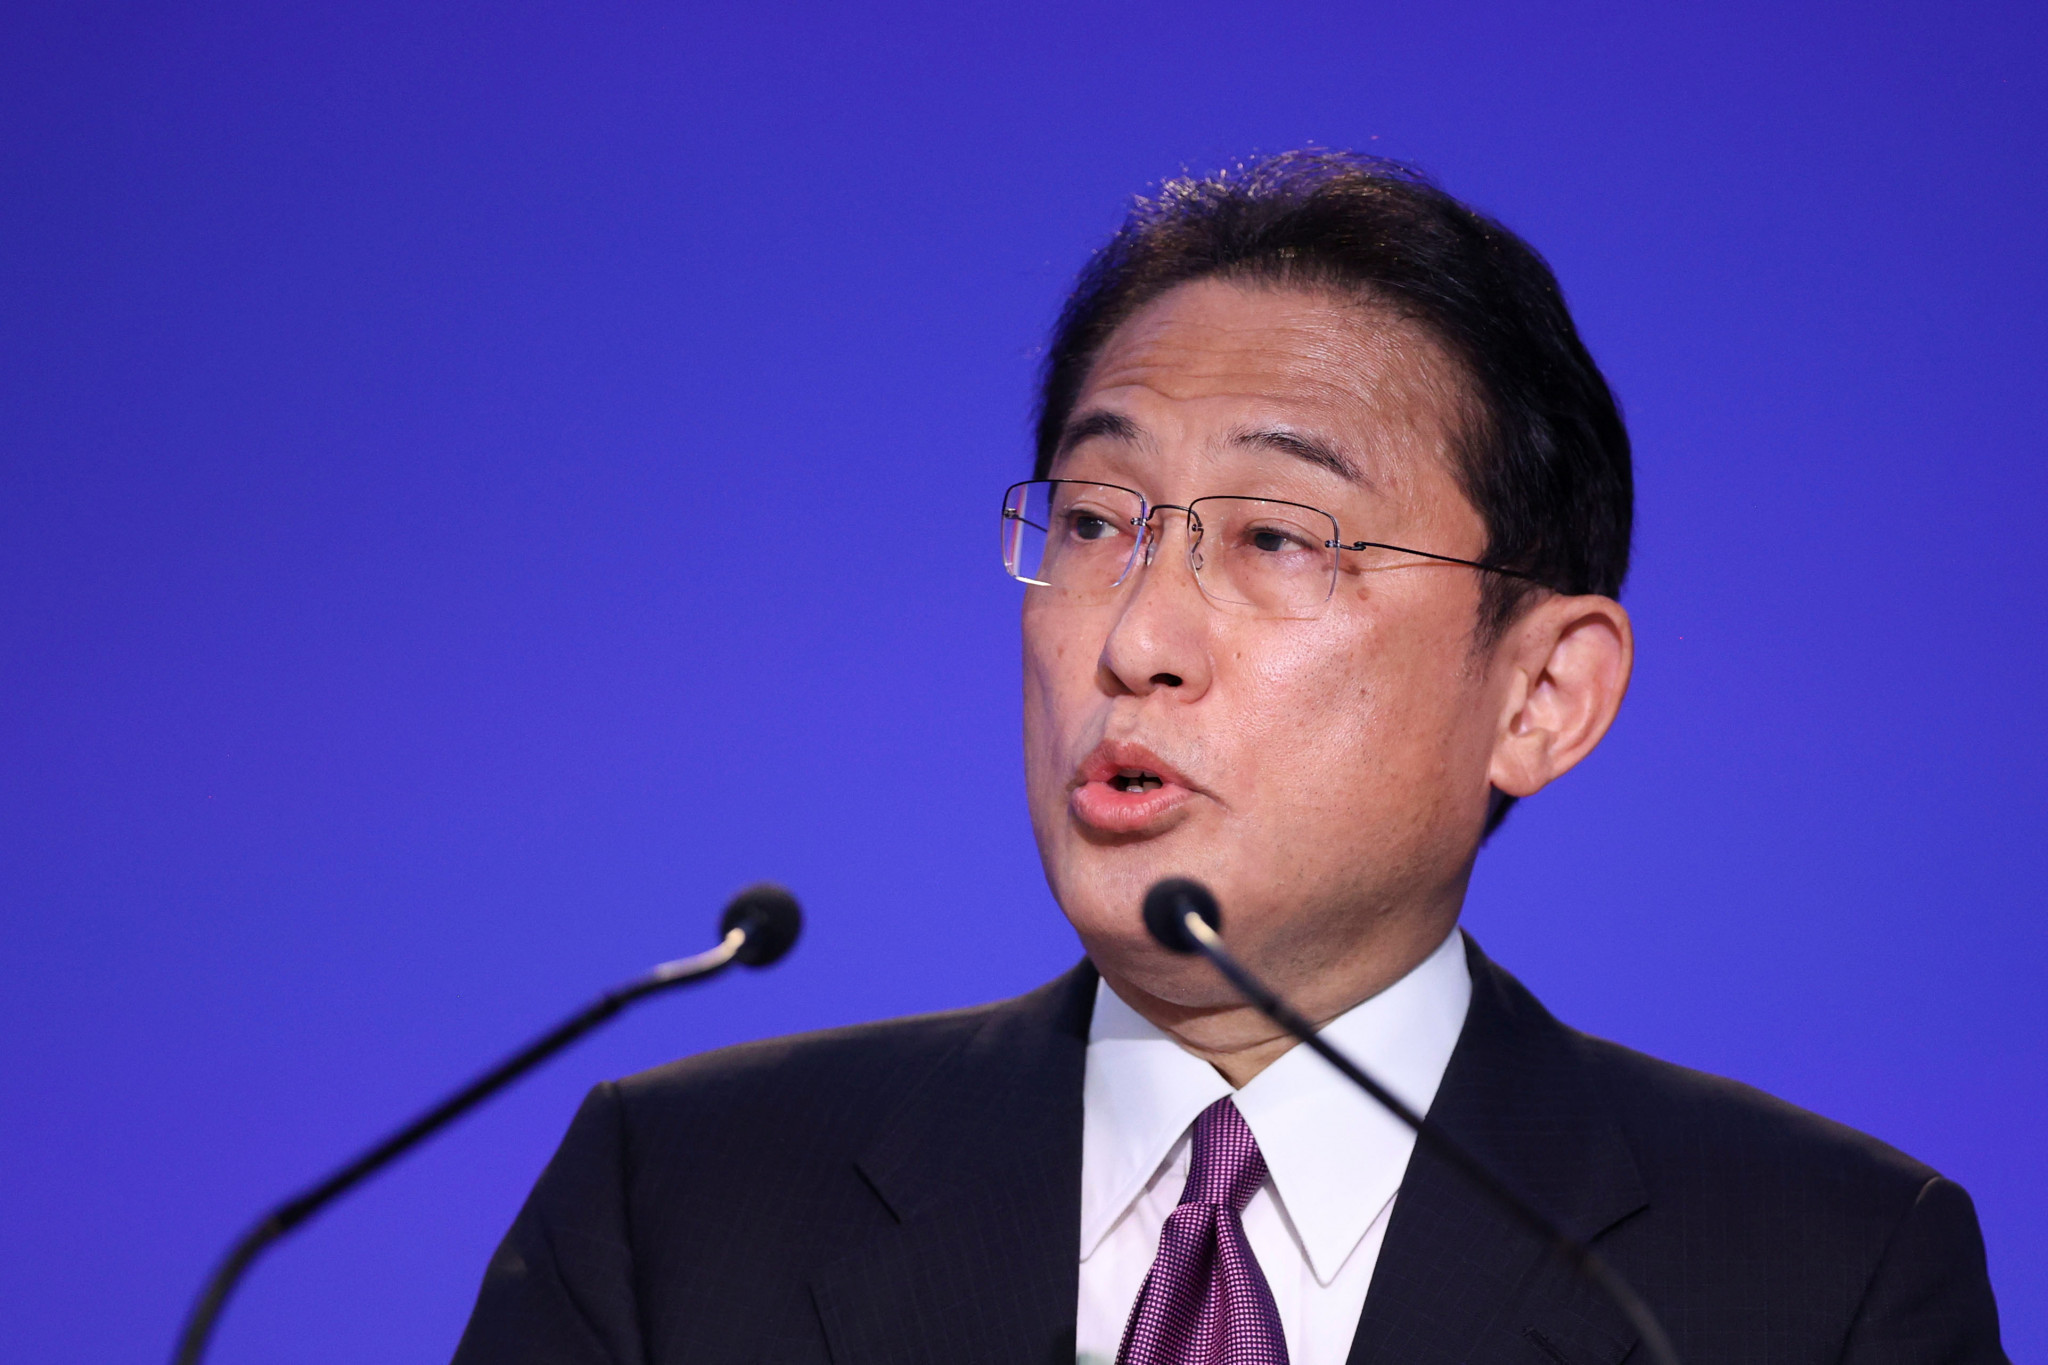 Japan's Prime Minister Fumio Kishida has "no plans" to attend Beijing 2022 ©Getty Images